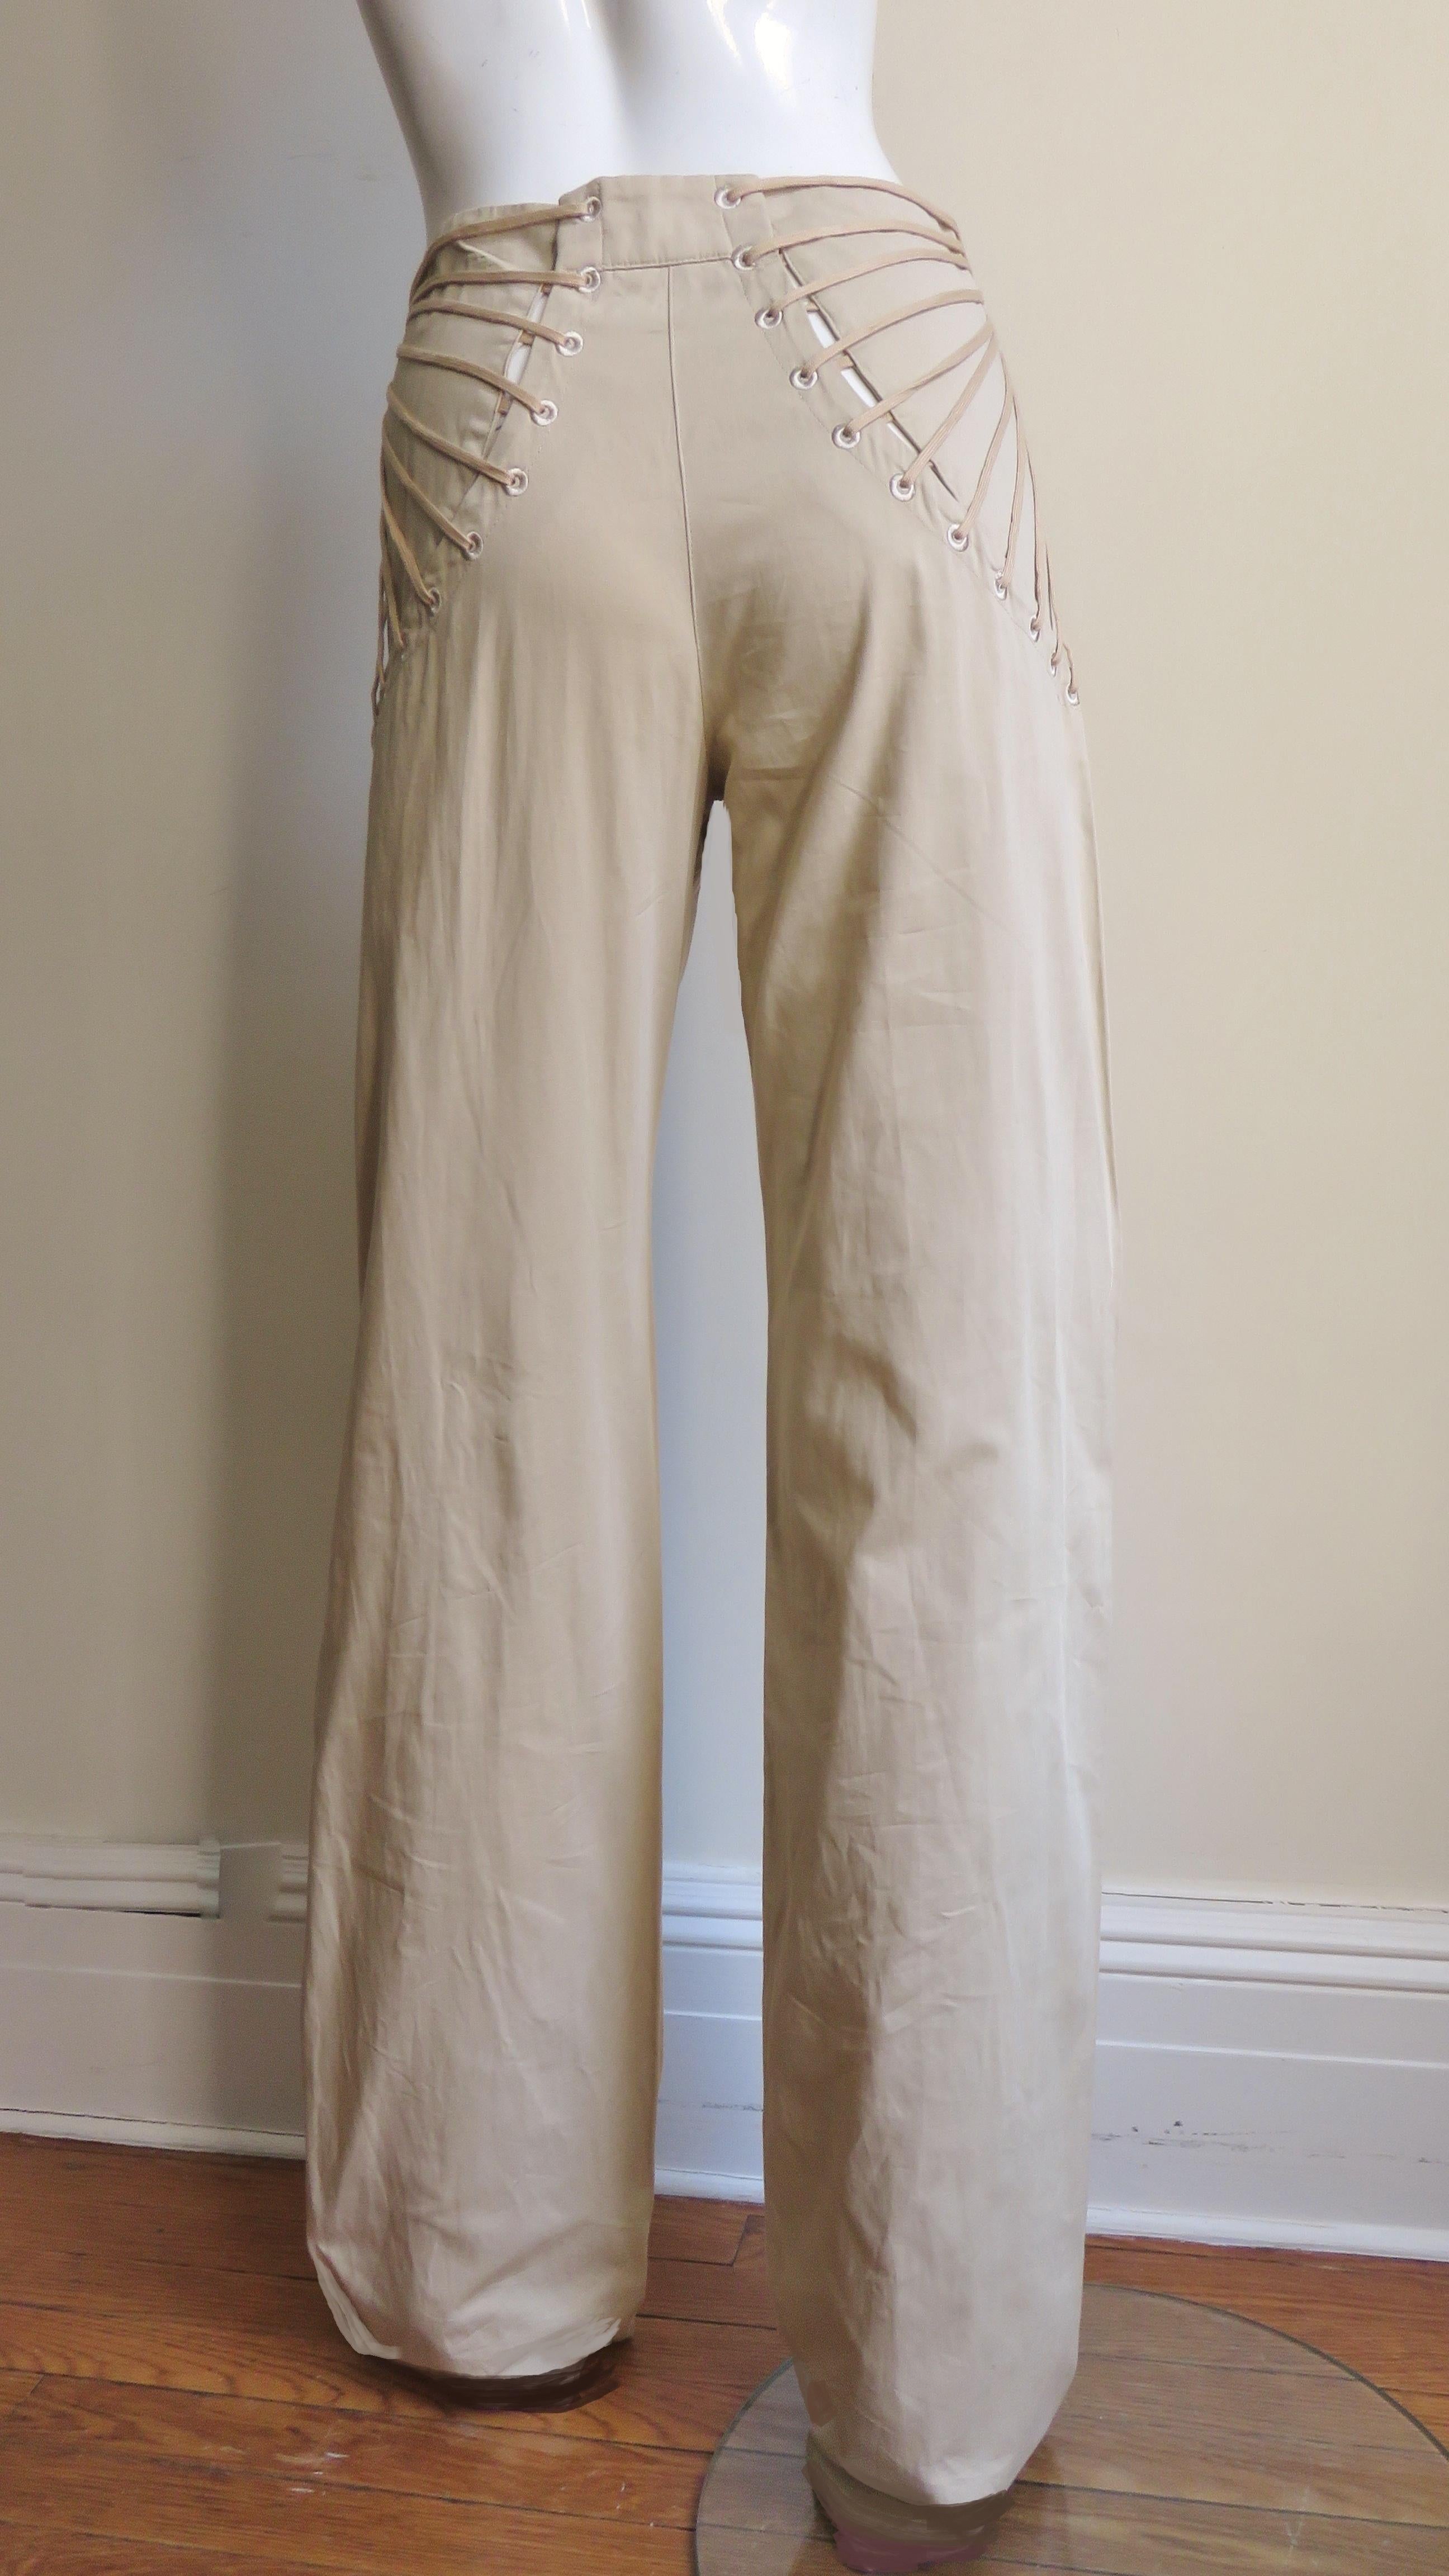 Fabulous khaki cotton pants from Alexander McQueen. They have full straight legs with curved panels over the back hips with a fan of laces meeting and buttoning on the front sides at the waist.  
Unworn condition.  Fits size Small, Medium. Marked